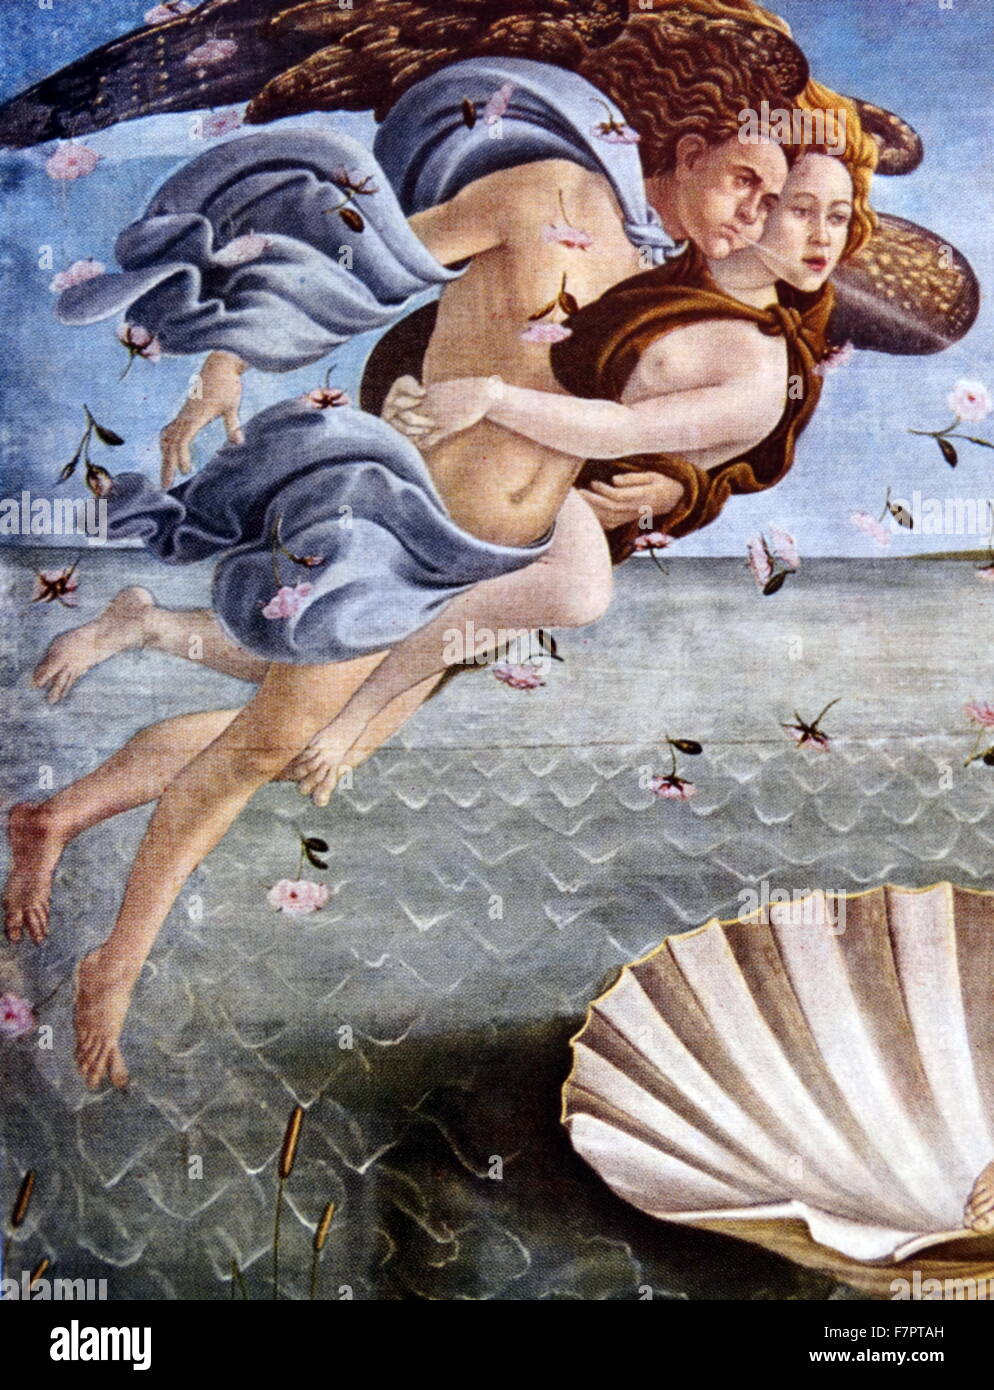 The Birth of Venus (detail);by Sandro Botticelli;Italian painter, circa 1445 - 1510. He belonged to the early renaissance, Florentine School under the patronage of Lorenzo de' Medici. The Birth of Venus (Nascita di Venere) by Sandro Botticelli generally thought to have been painted in the mid 1480s. It depicts the goddess Venus, having emerged from the sea as an adult woman, arriving at the shore. Stock Photo